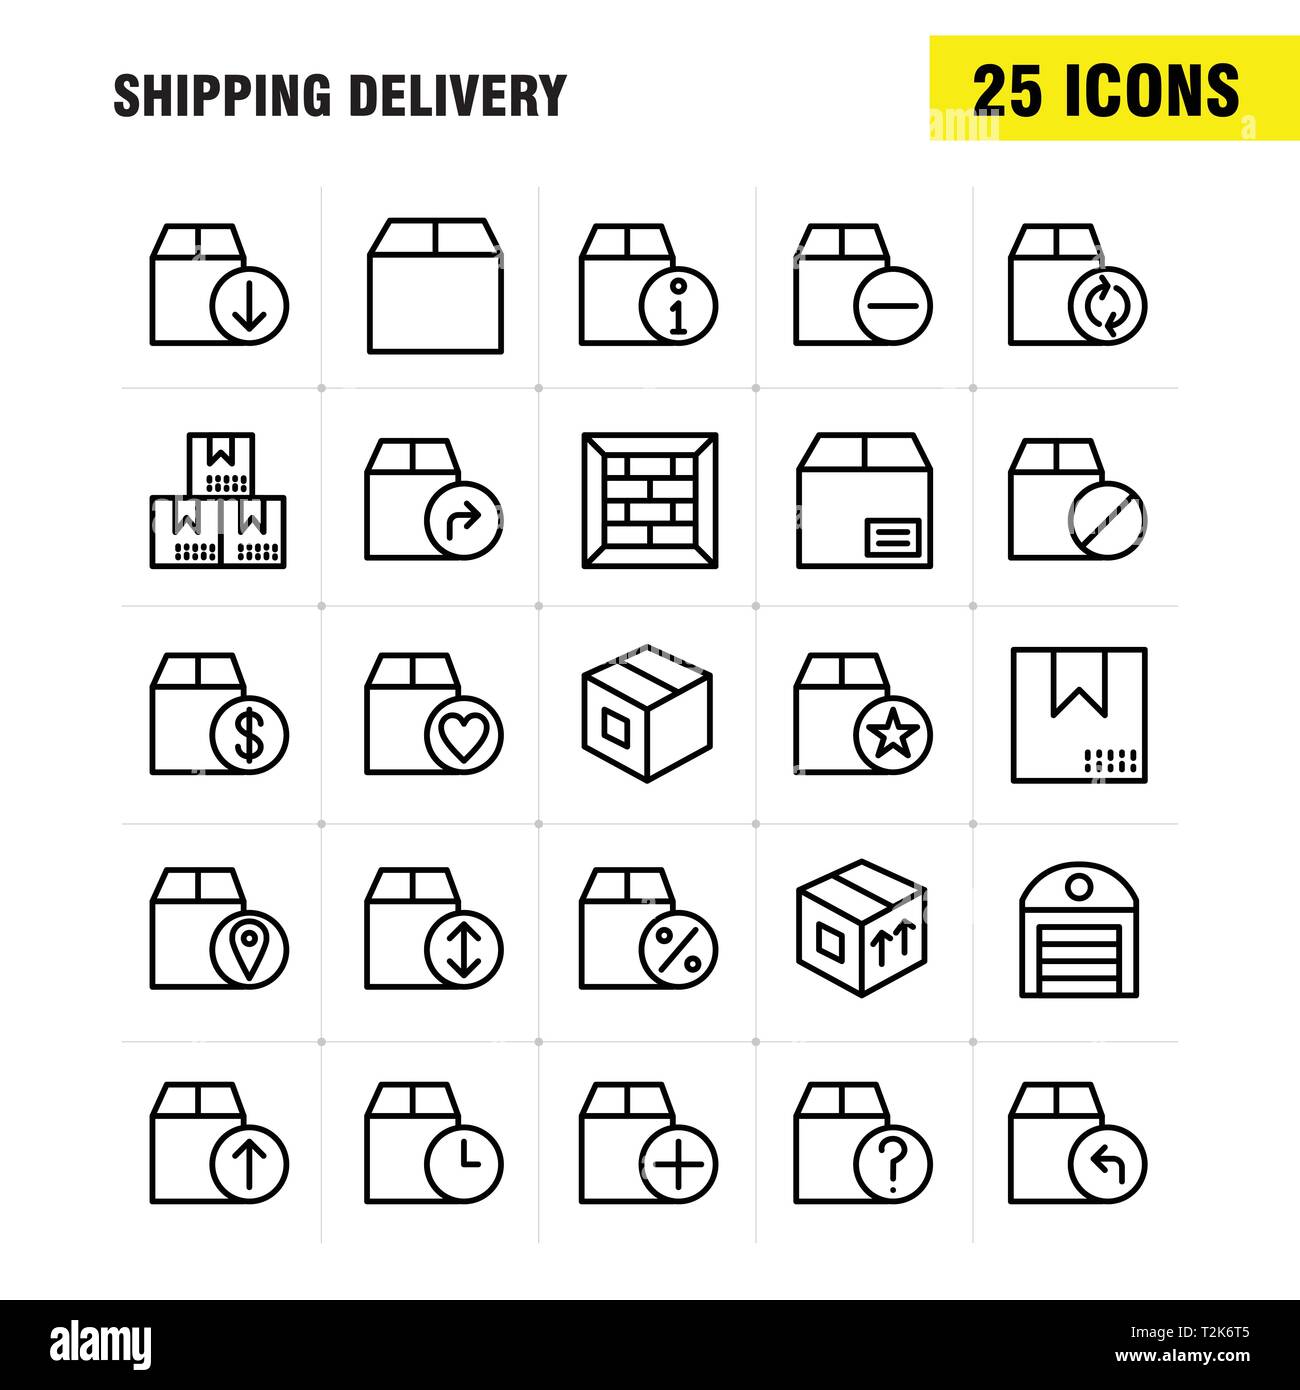 Unboxing - Free shipping and delivery icons